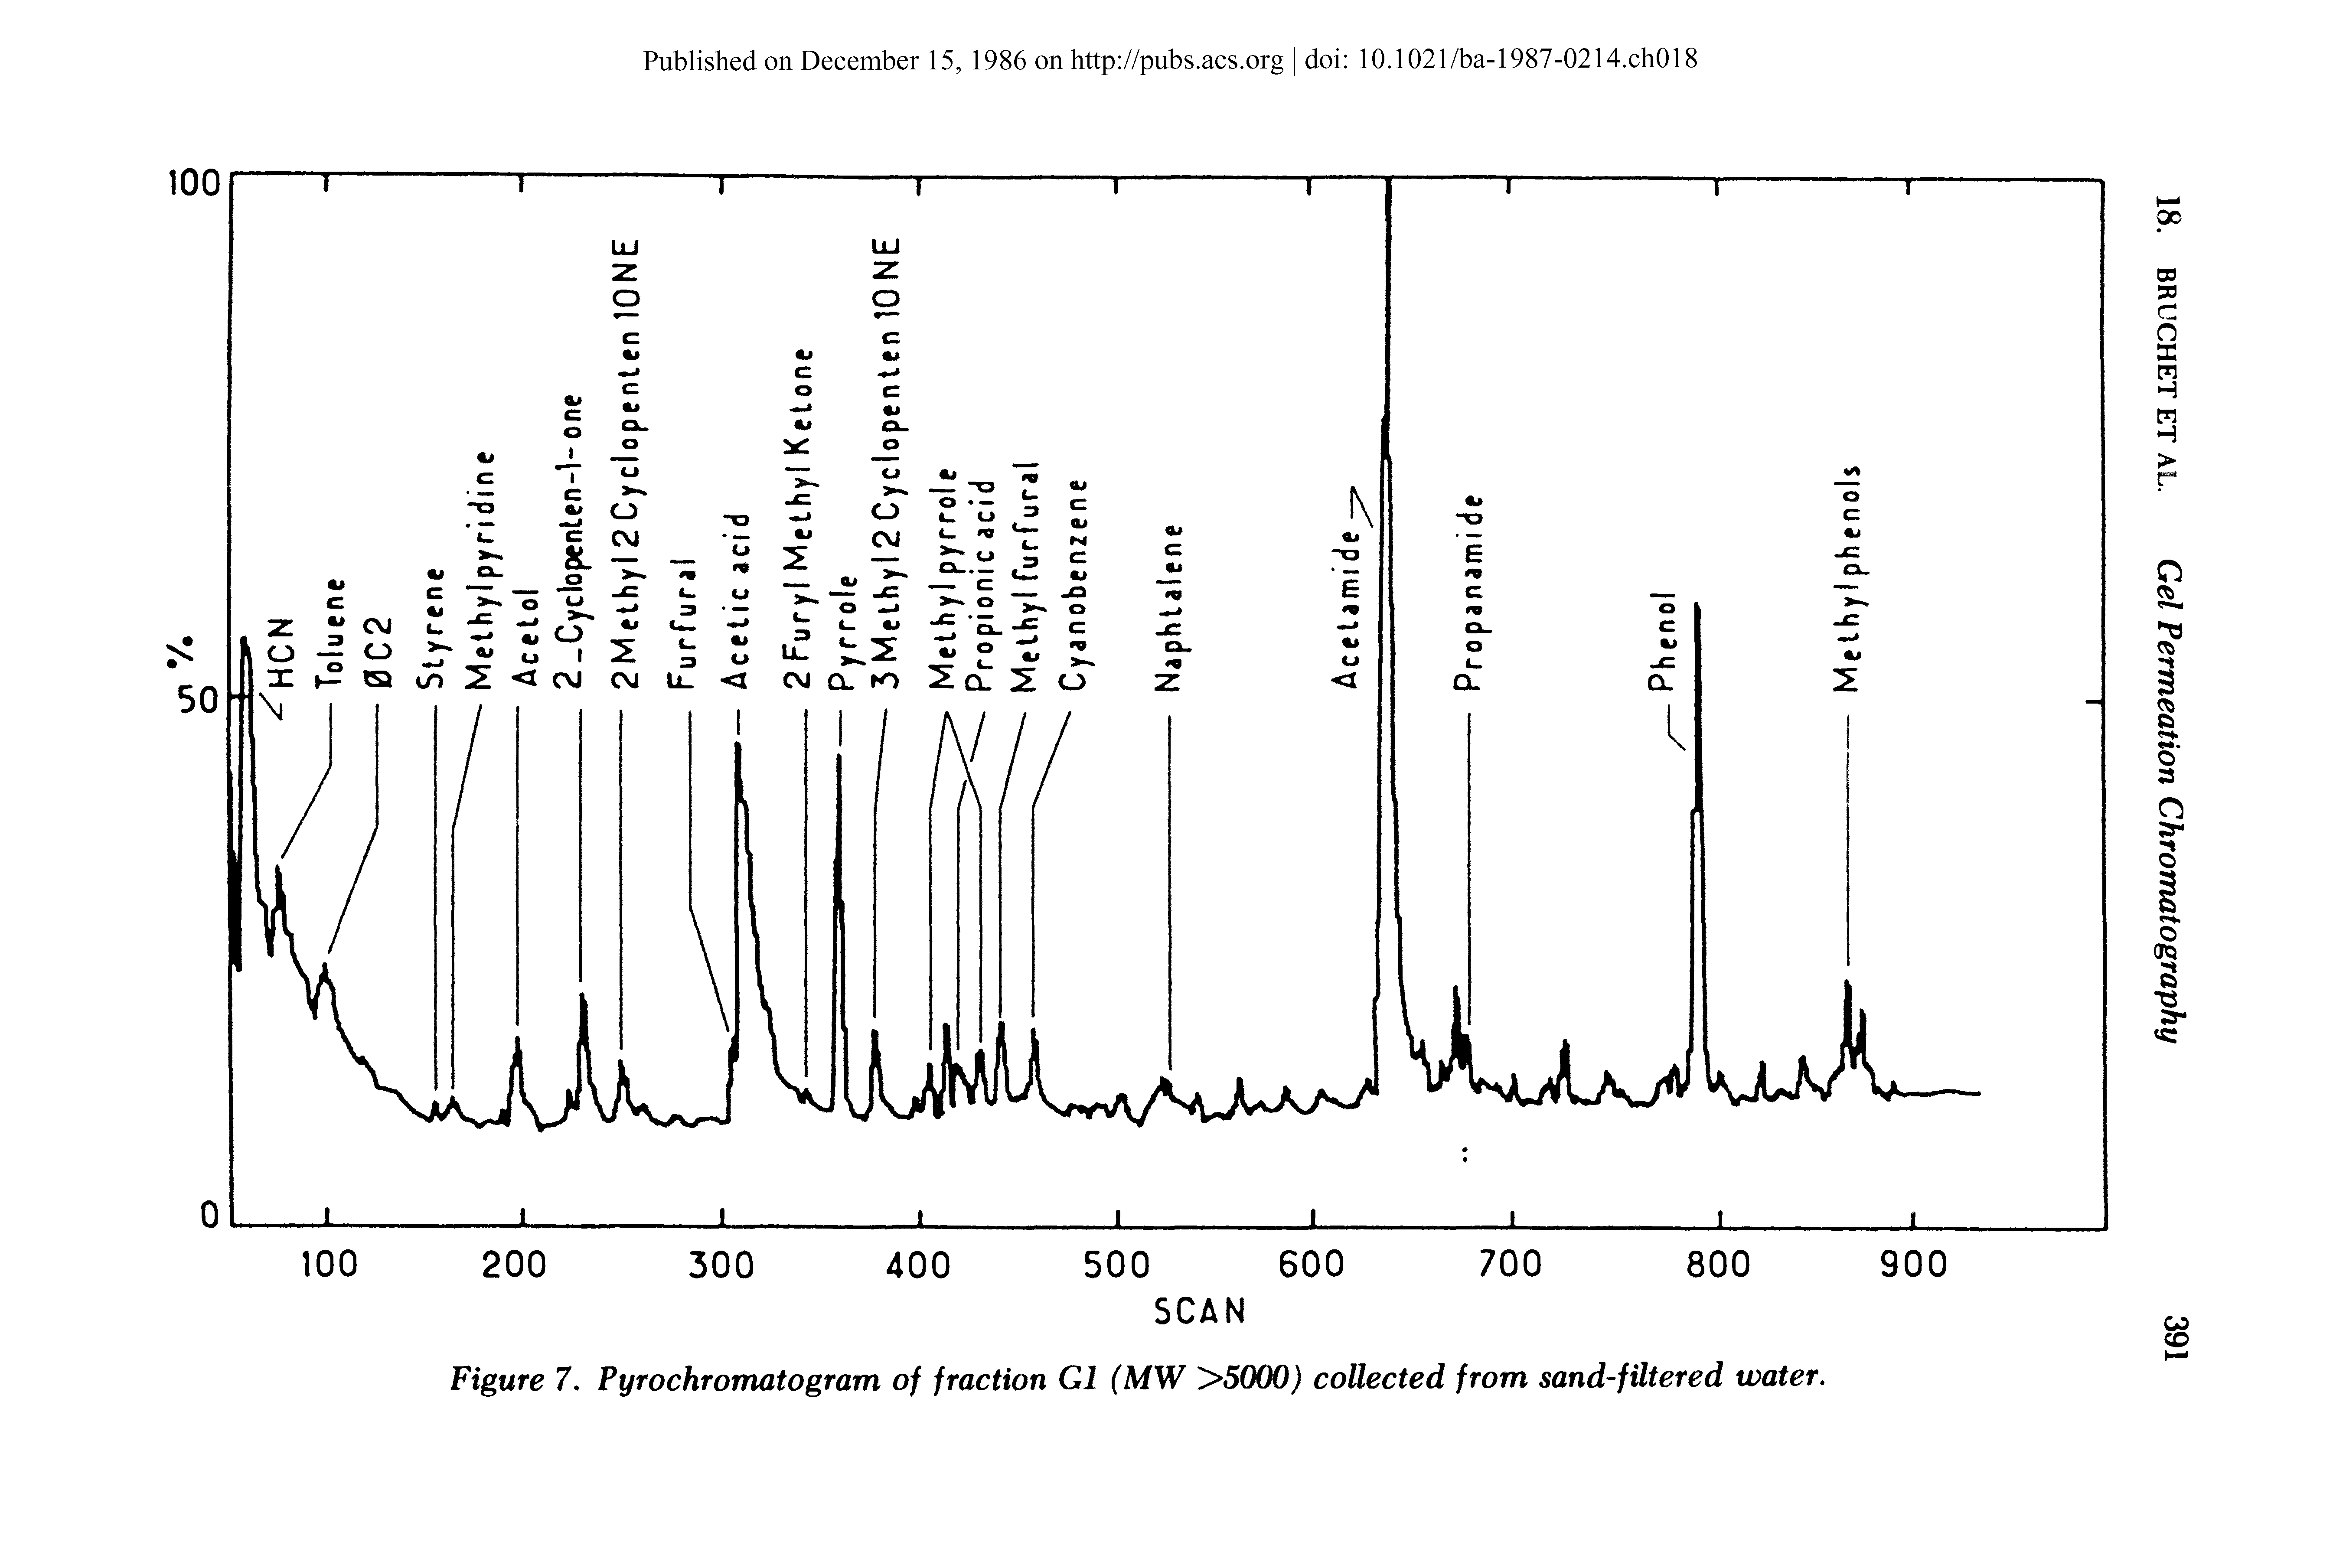 Figure 7. Pyrochromatogram of fraction G1 (MW >5000) collected from sand-filtered water.